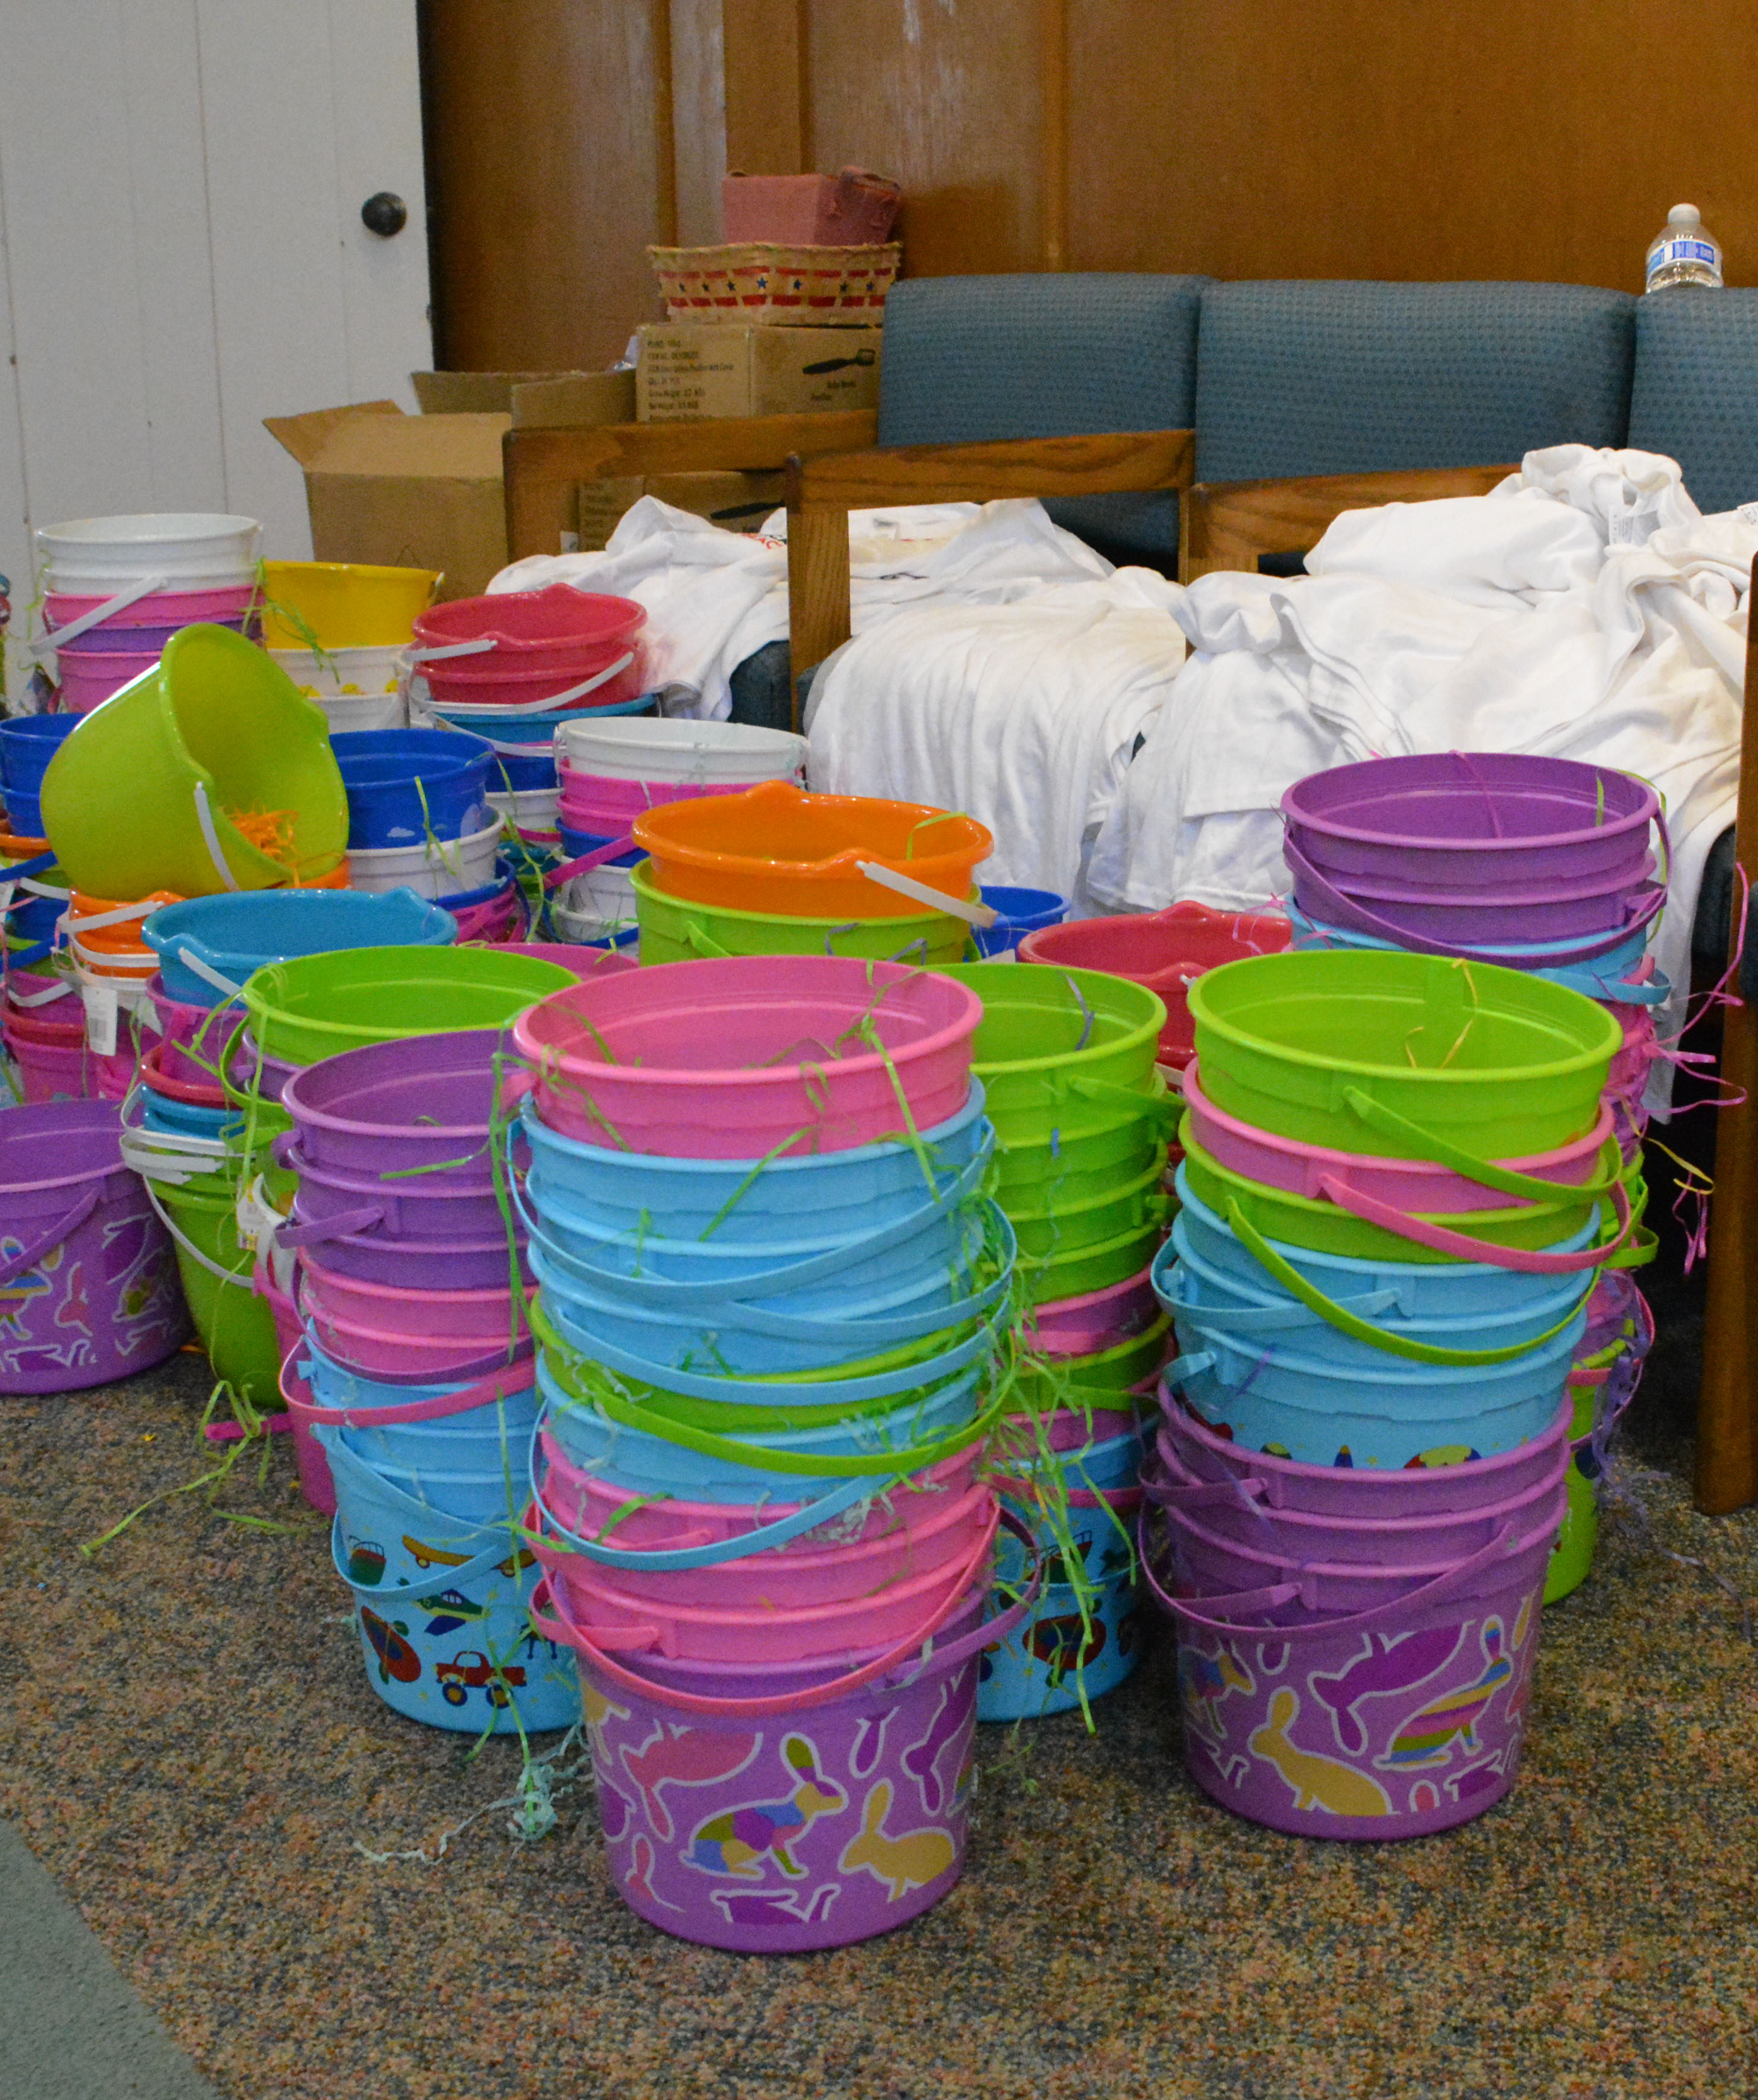 Multicolored plastic sand pails with Easter grass in them sit on carpeted floor waiting to be filled